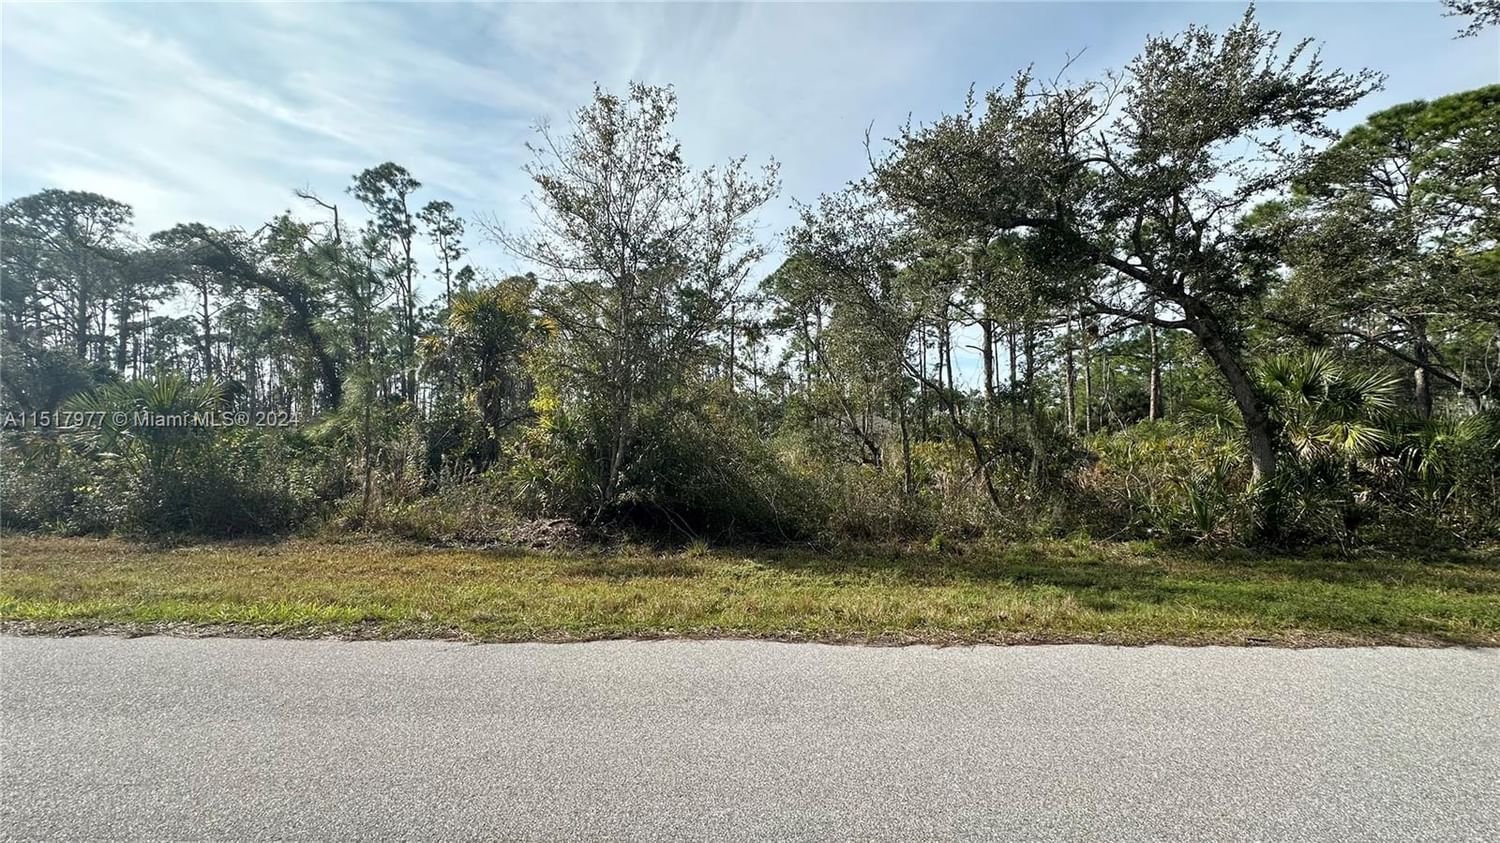 Real estate property located at 12493 Harlow Avenue, Charlotte County, PORT CHARLOTTE SEC 38, Port Charlotte, FL